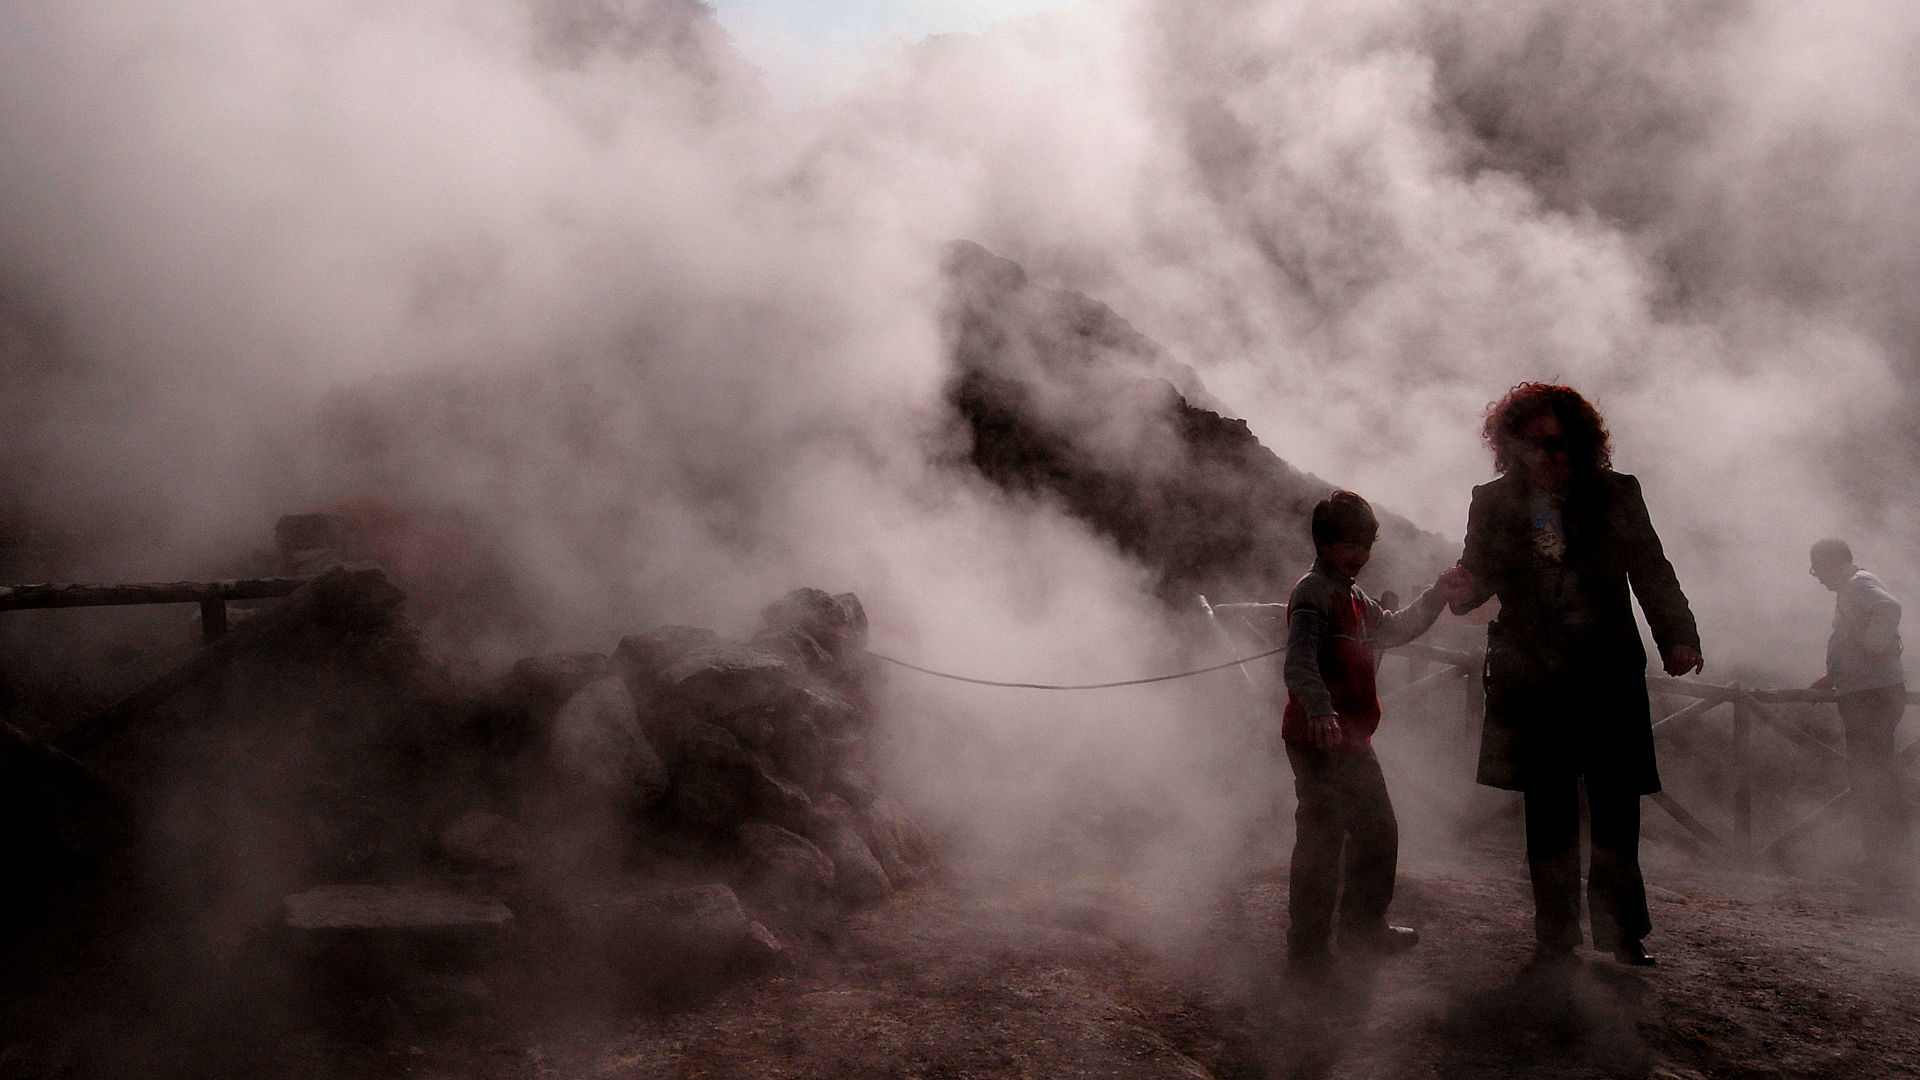 Tourists visit the Solfatara crater, part of the Phlegraean Fields, an active volcano near Naples, Italy.